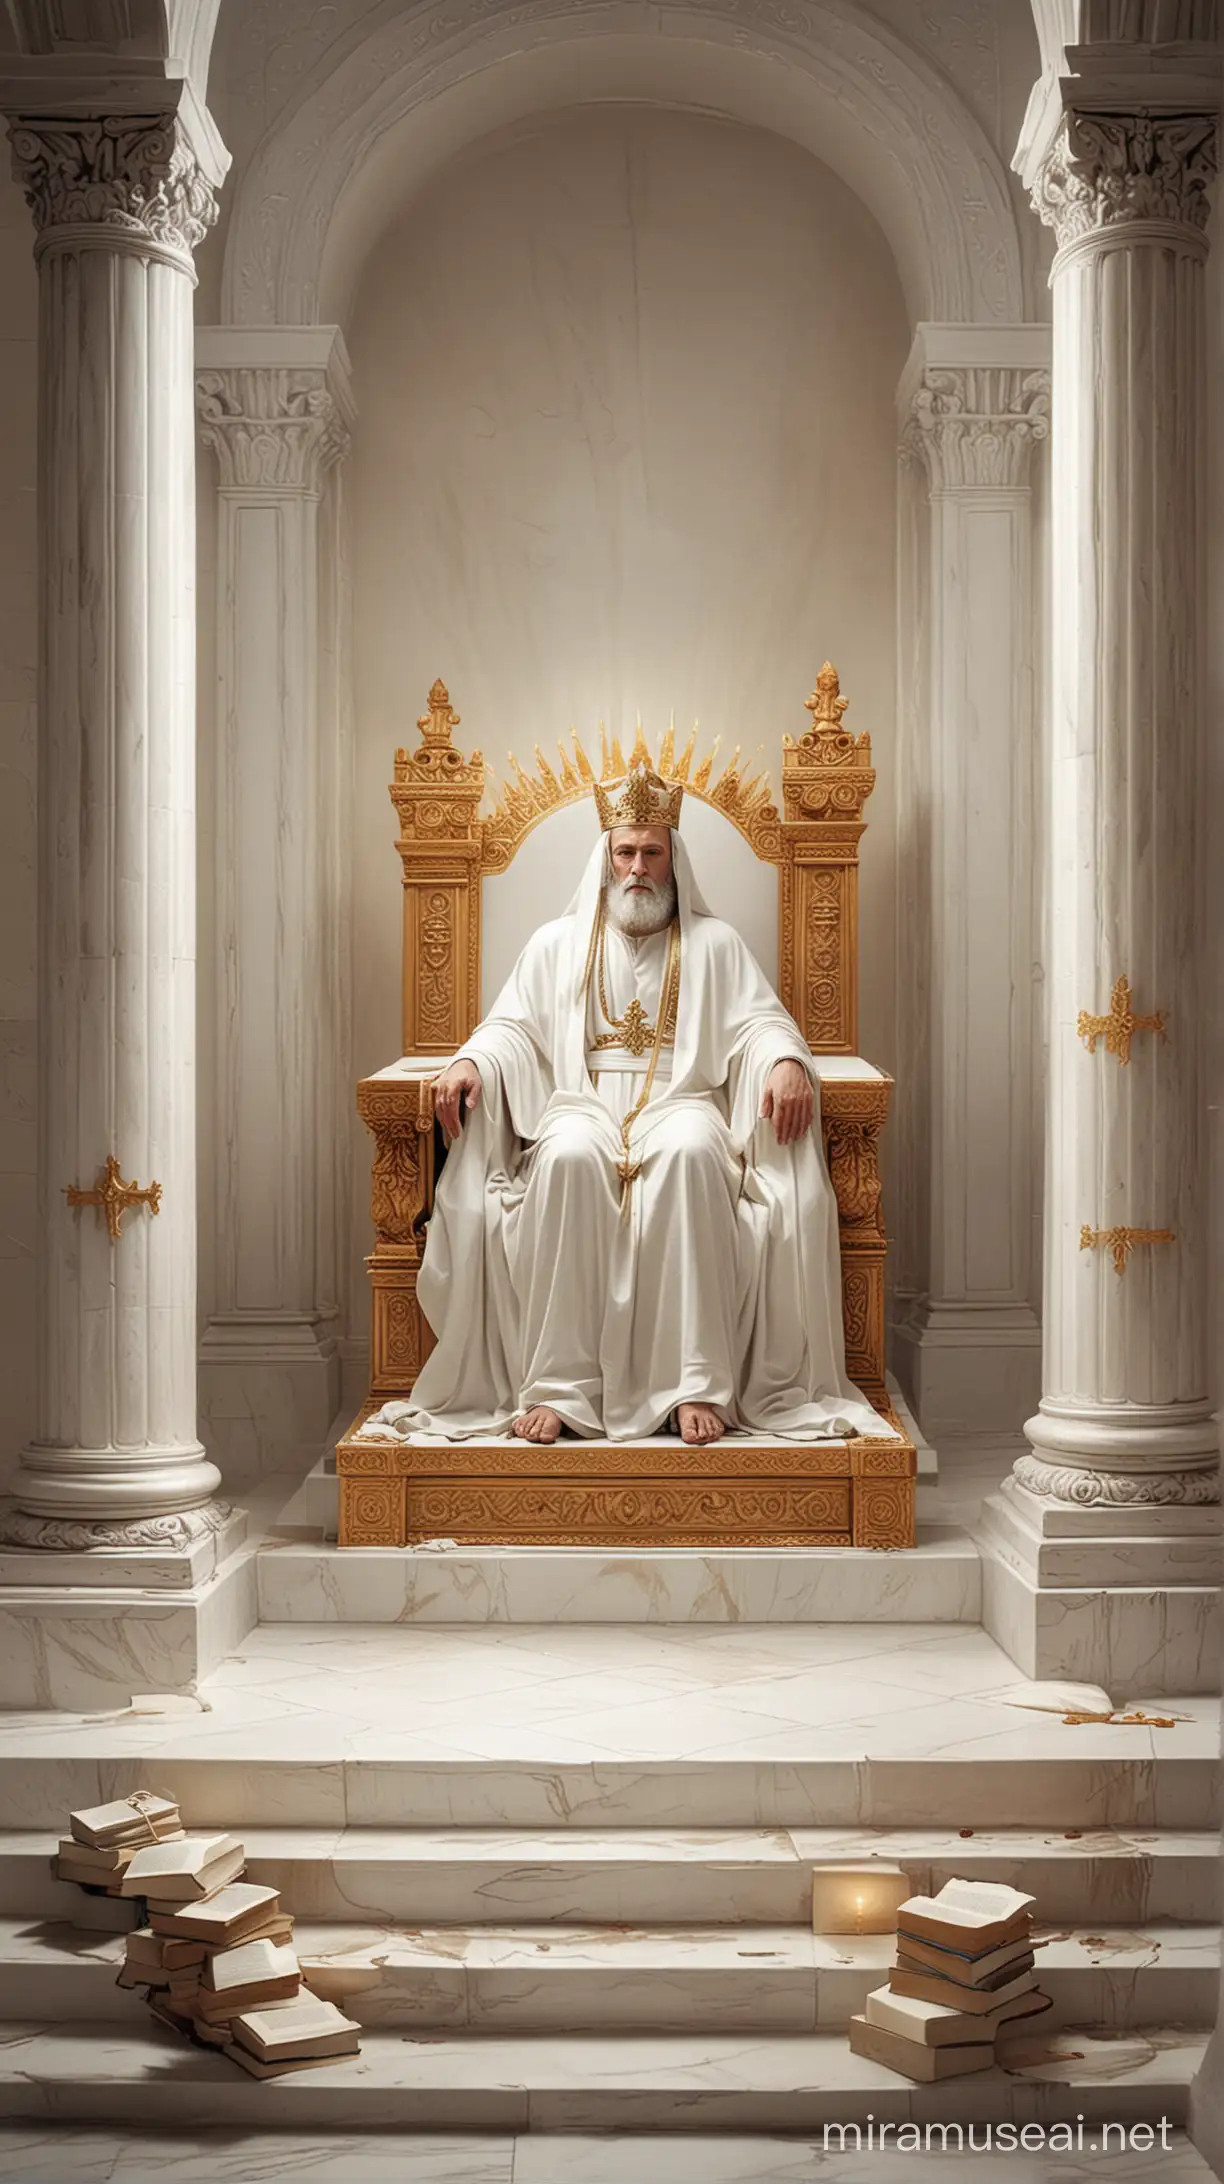 God siting on the white throne judgement sit and books are open before him